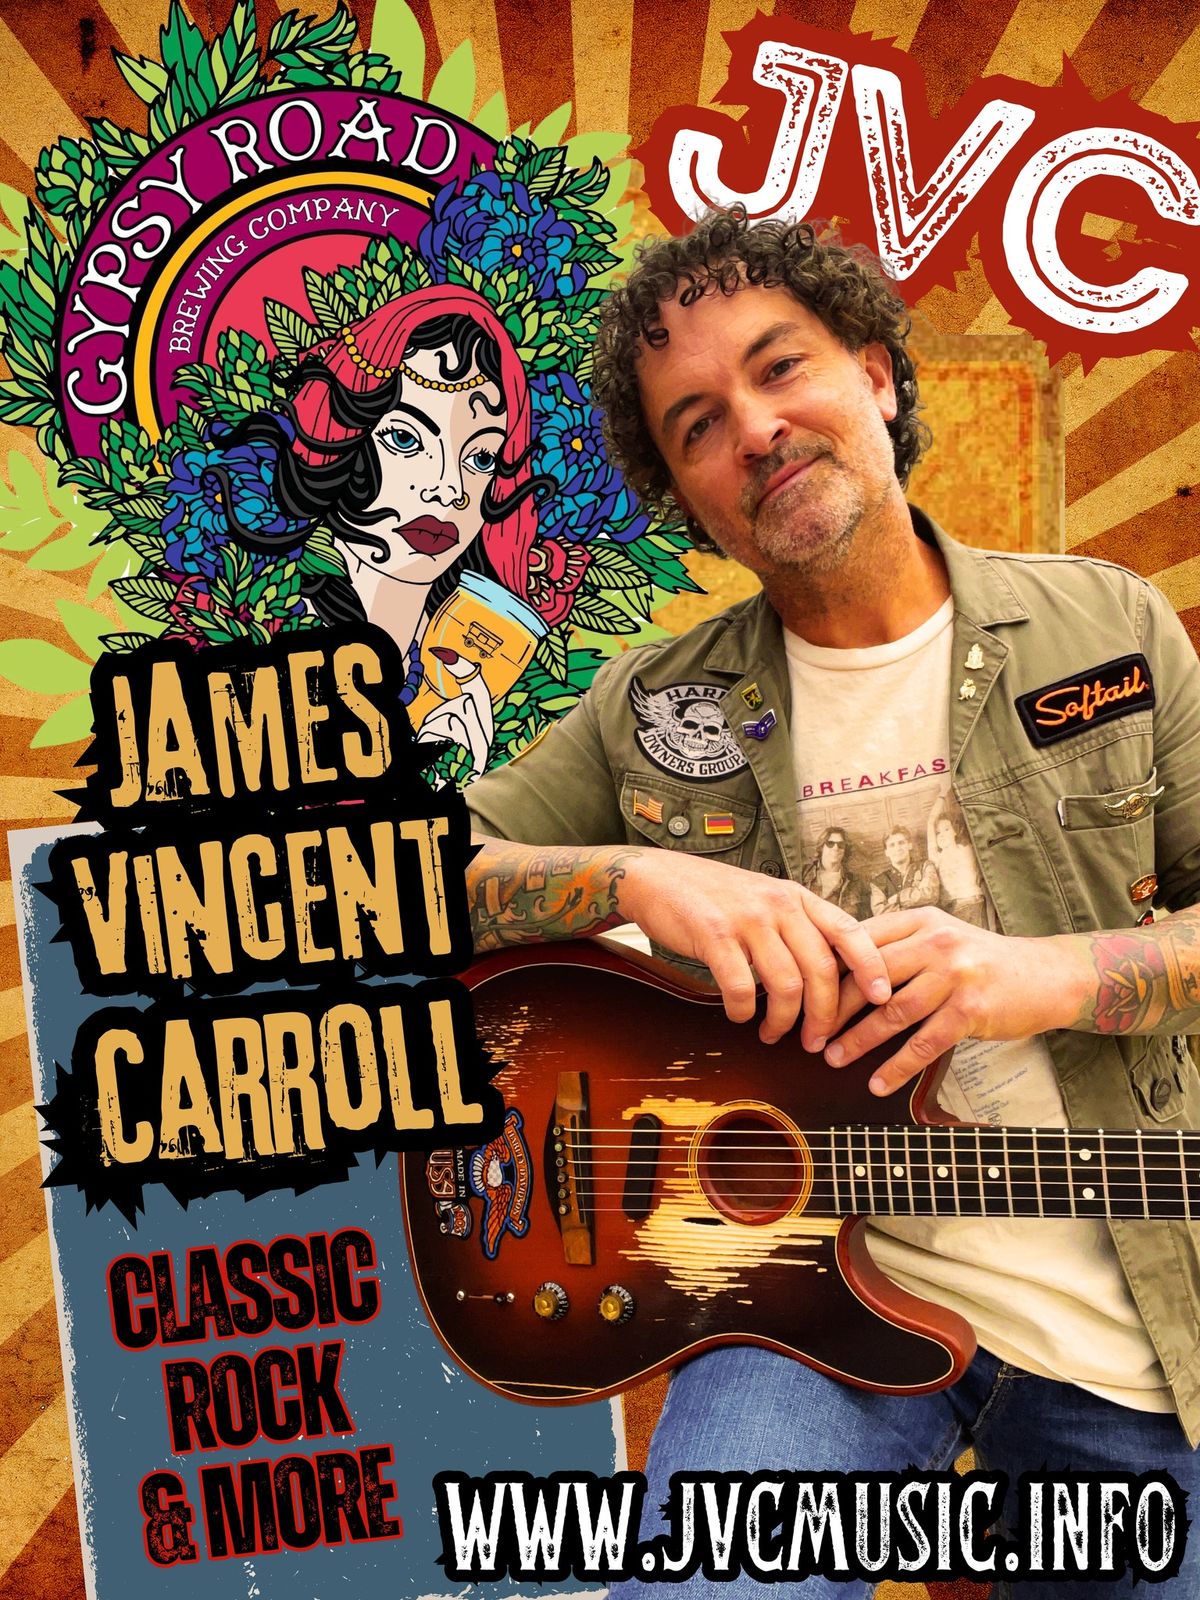 The Music of James Vincent Carroll at Gypsy Road Brewing